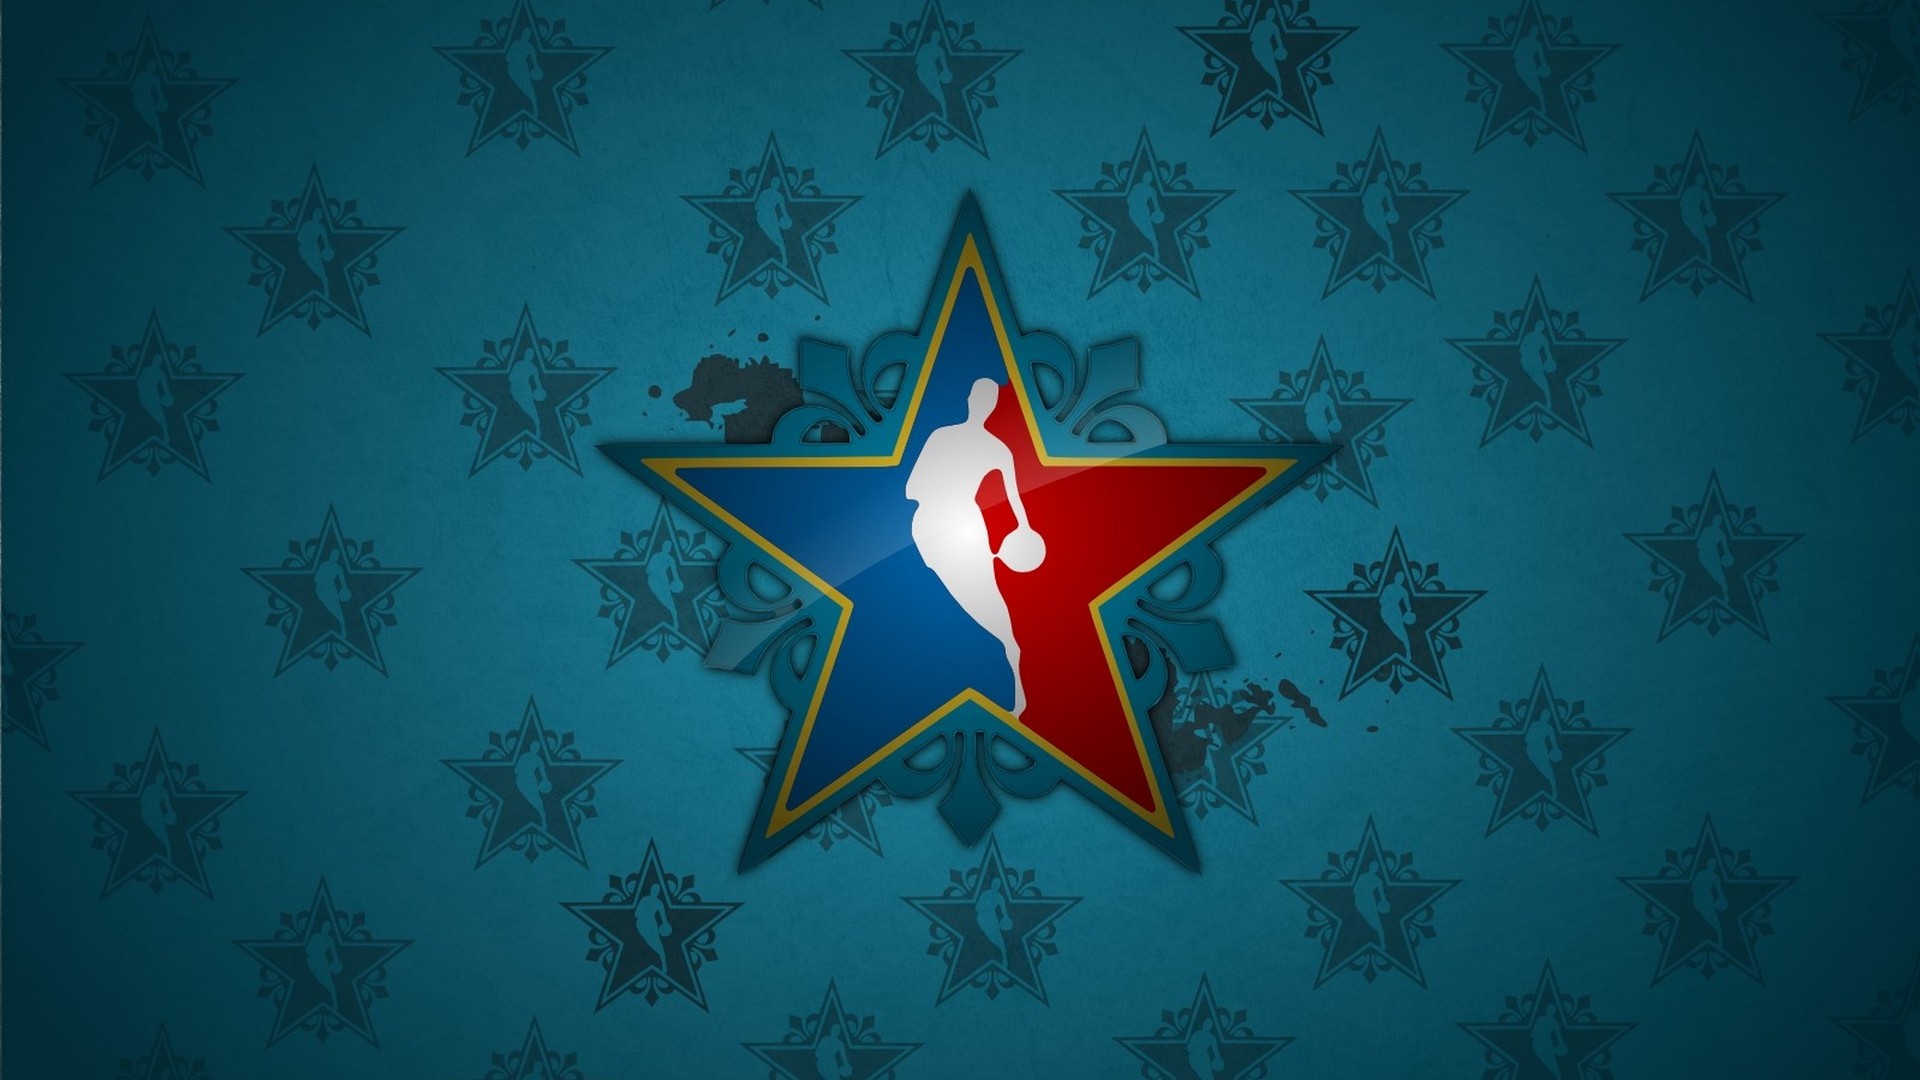 HD Backgrounds NBA with image dimensions 1920x1080 pixel. You can make this wallpaper for your Desktop Computer Backgrounds, Windows or Mac Screensavers, iPhone Lock screen, Tablet or Android and another Mobile Phone device